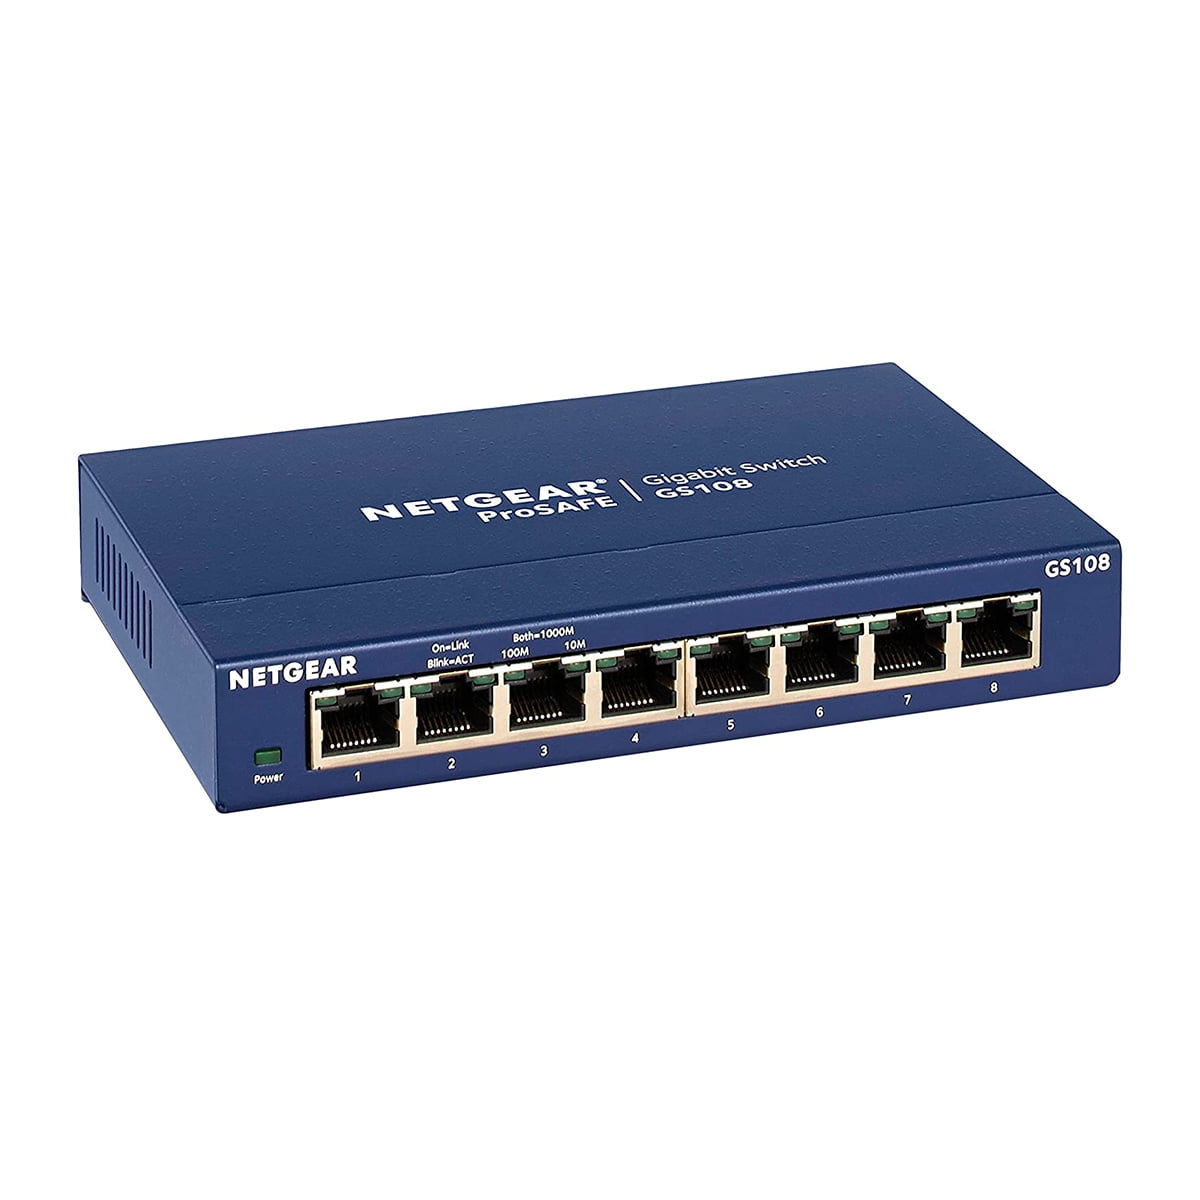 Amcrest 8-Port POE+ Power Over Ethernet POE Switch with Metal Housing, 8- Ports POE+ 802.3af/at 96w (AGPS8E8P-AT-96)